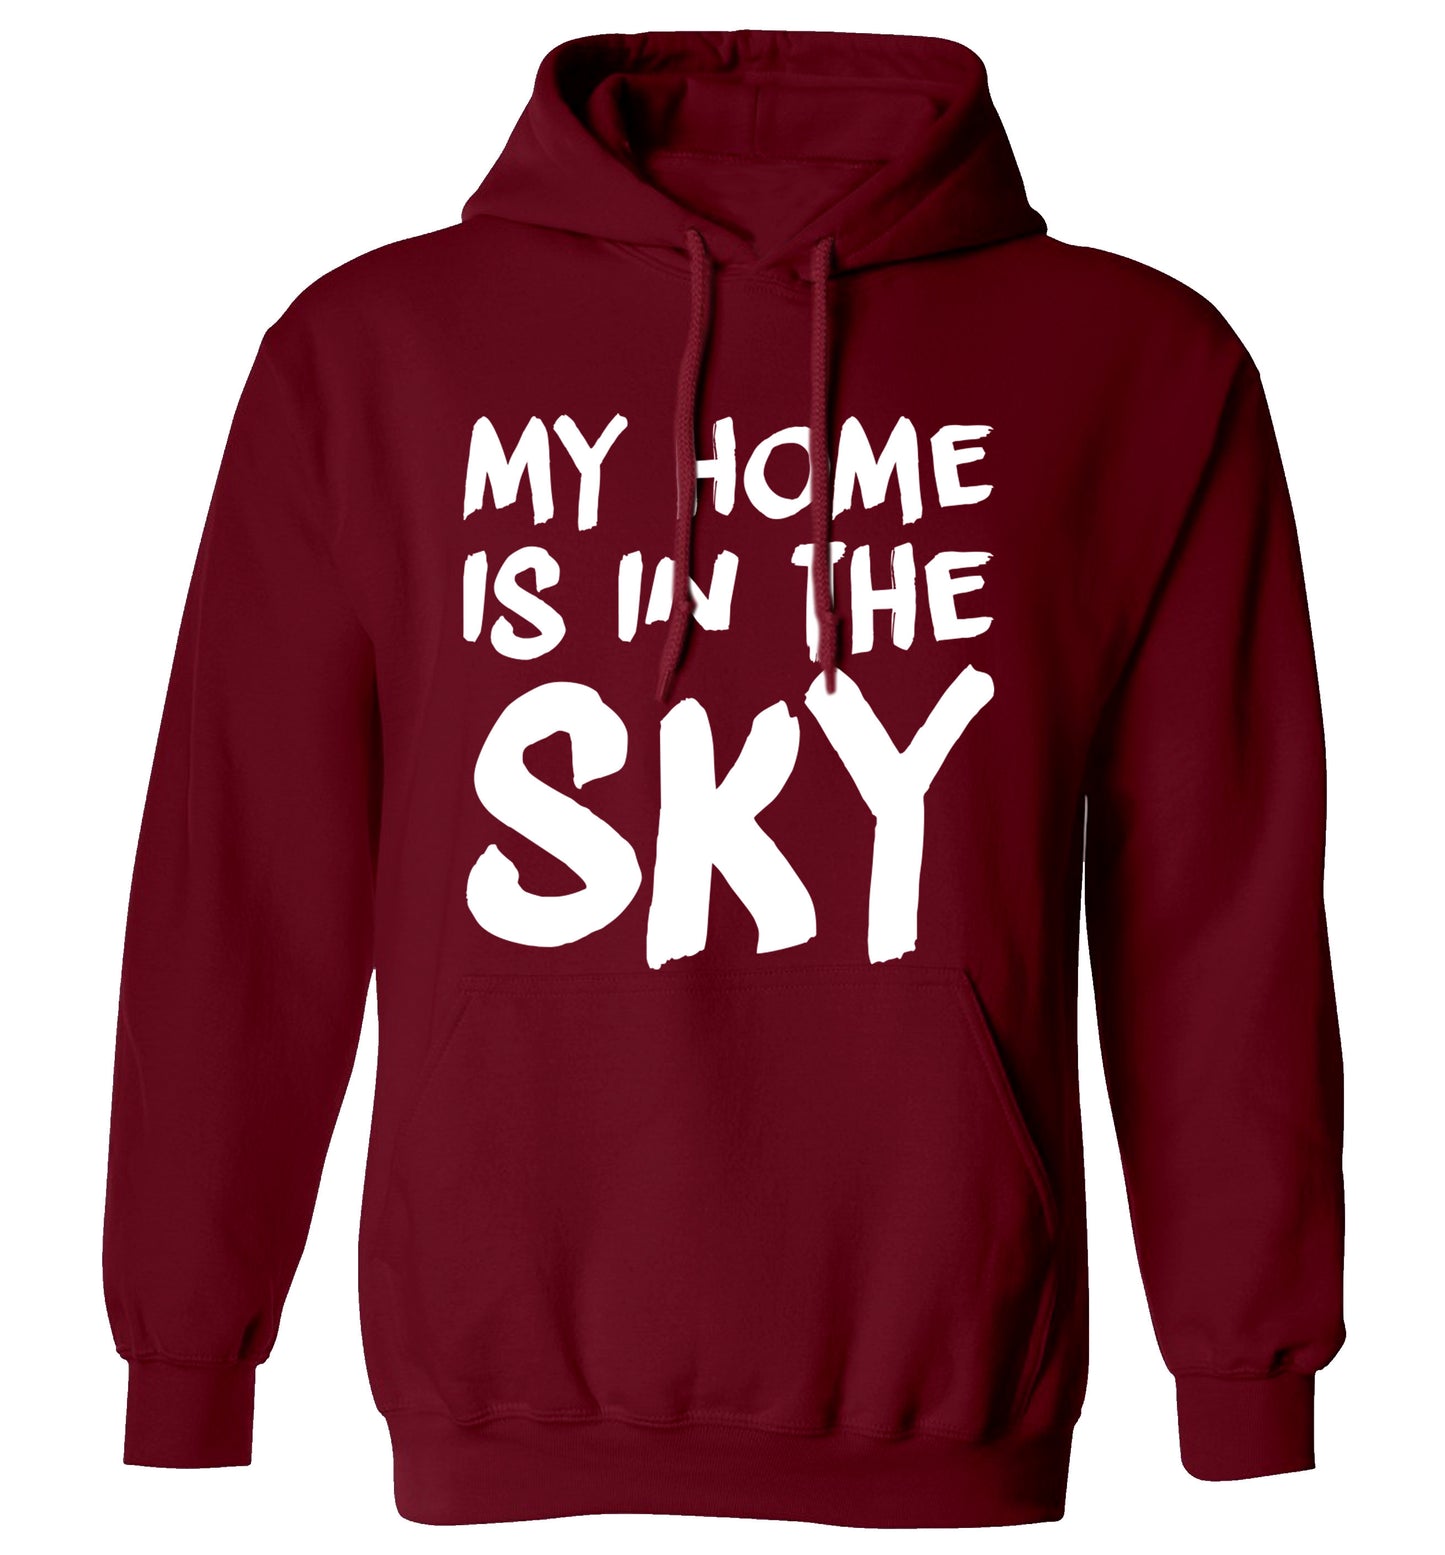 My home is in the sky adults unisex maroon hoodie 2XL